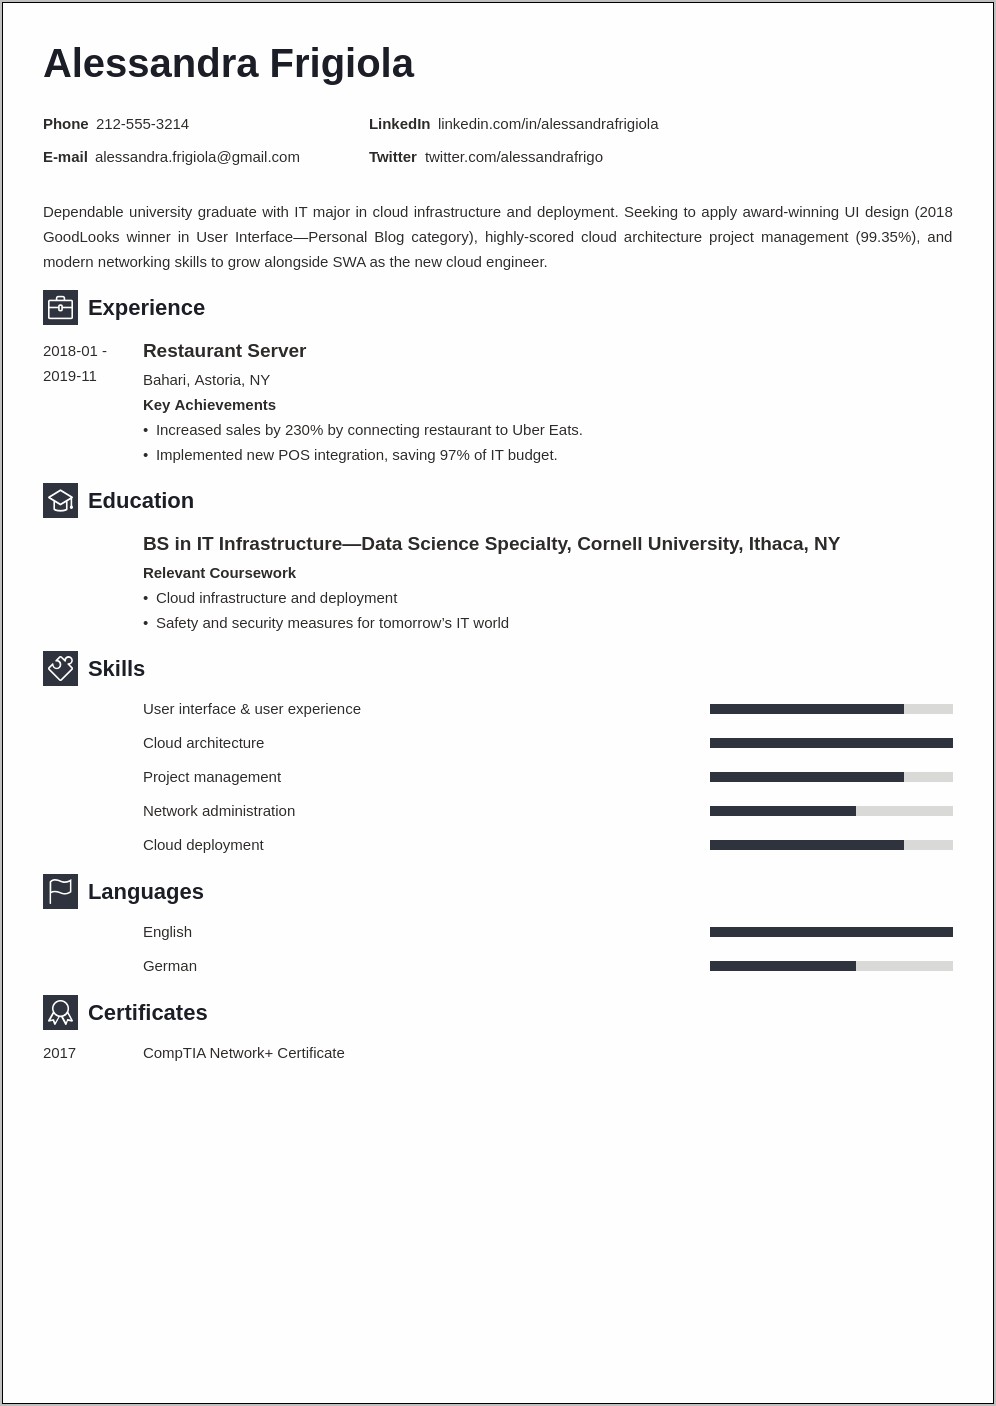 Goals And Objectives Examples For Resume